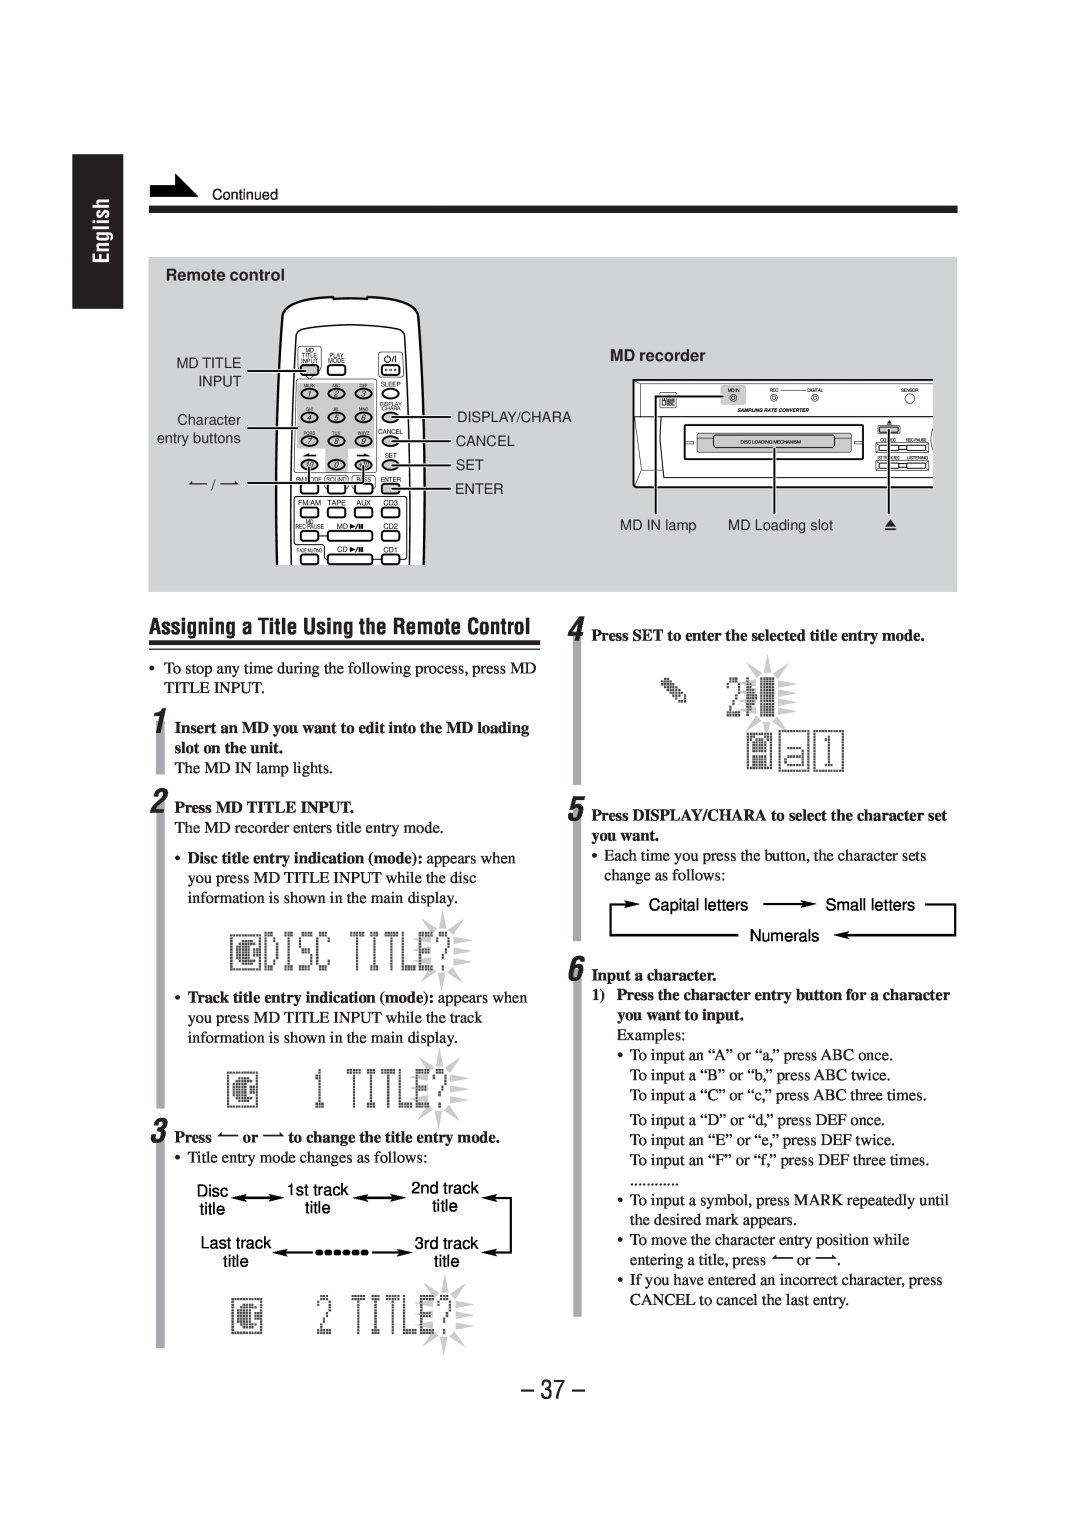 JVC CA-MD70 manual Assigning a Title Using the Remote Control, English, Remote control, MD recorder 